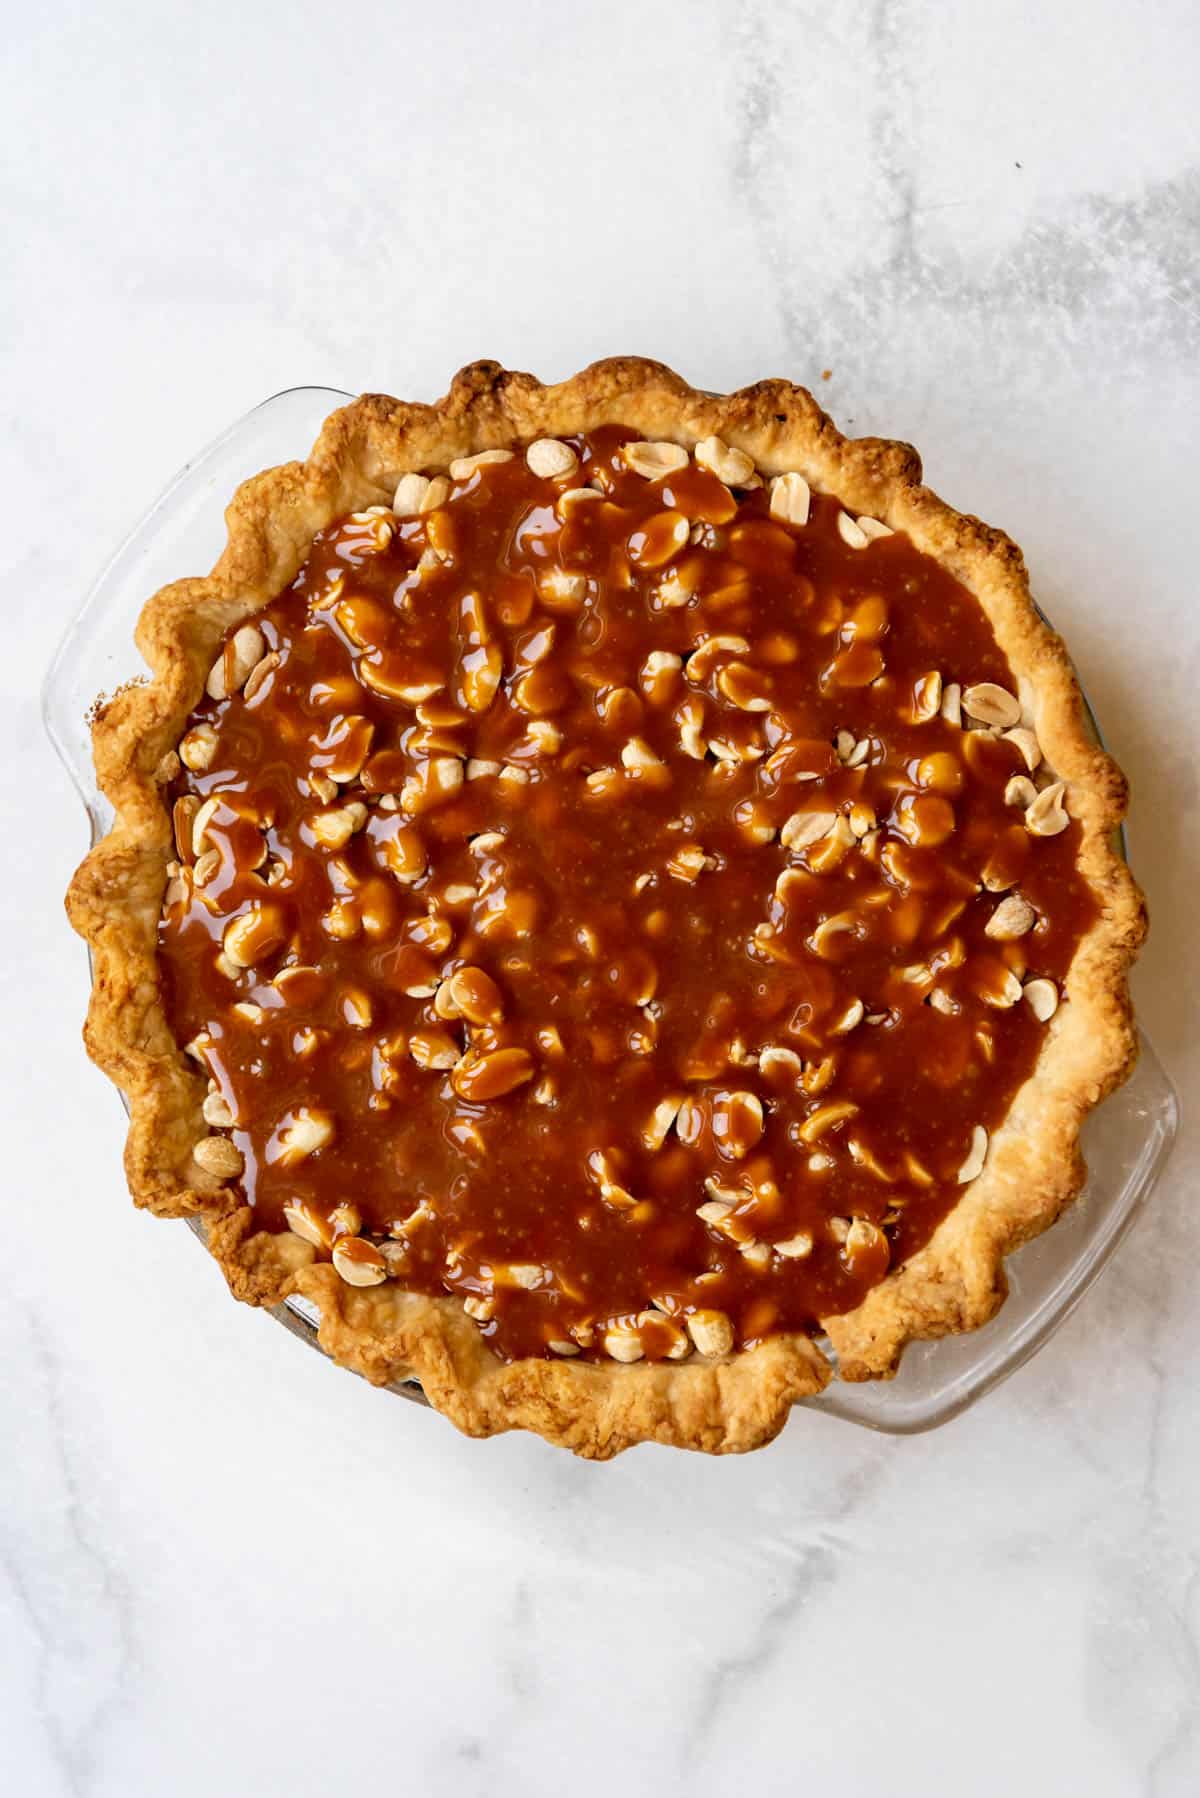 Caramel poured over roasted peanuts in a baked pie crust.